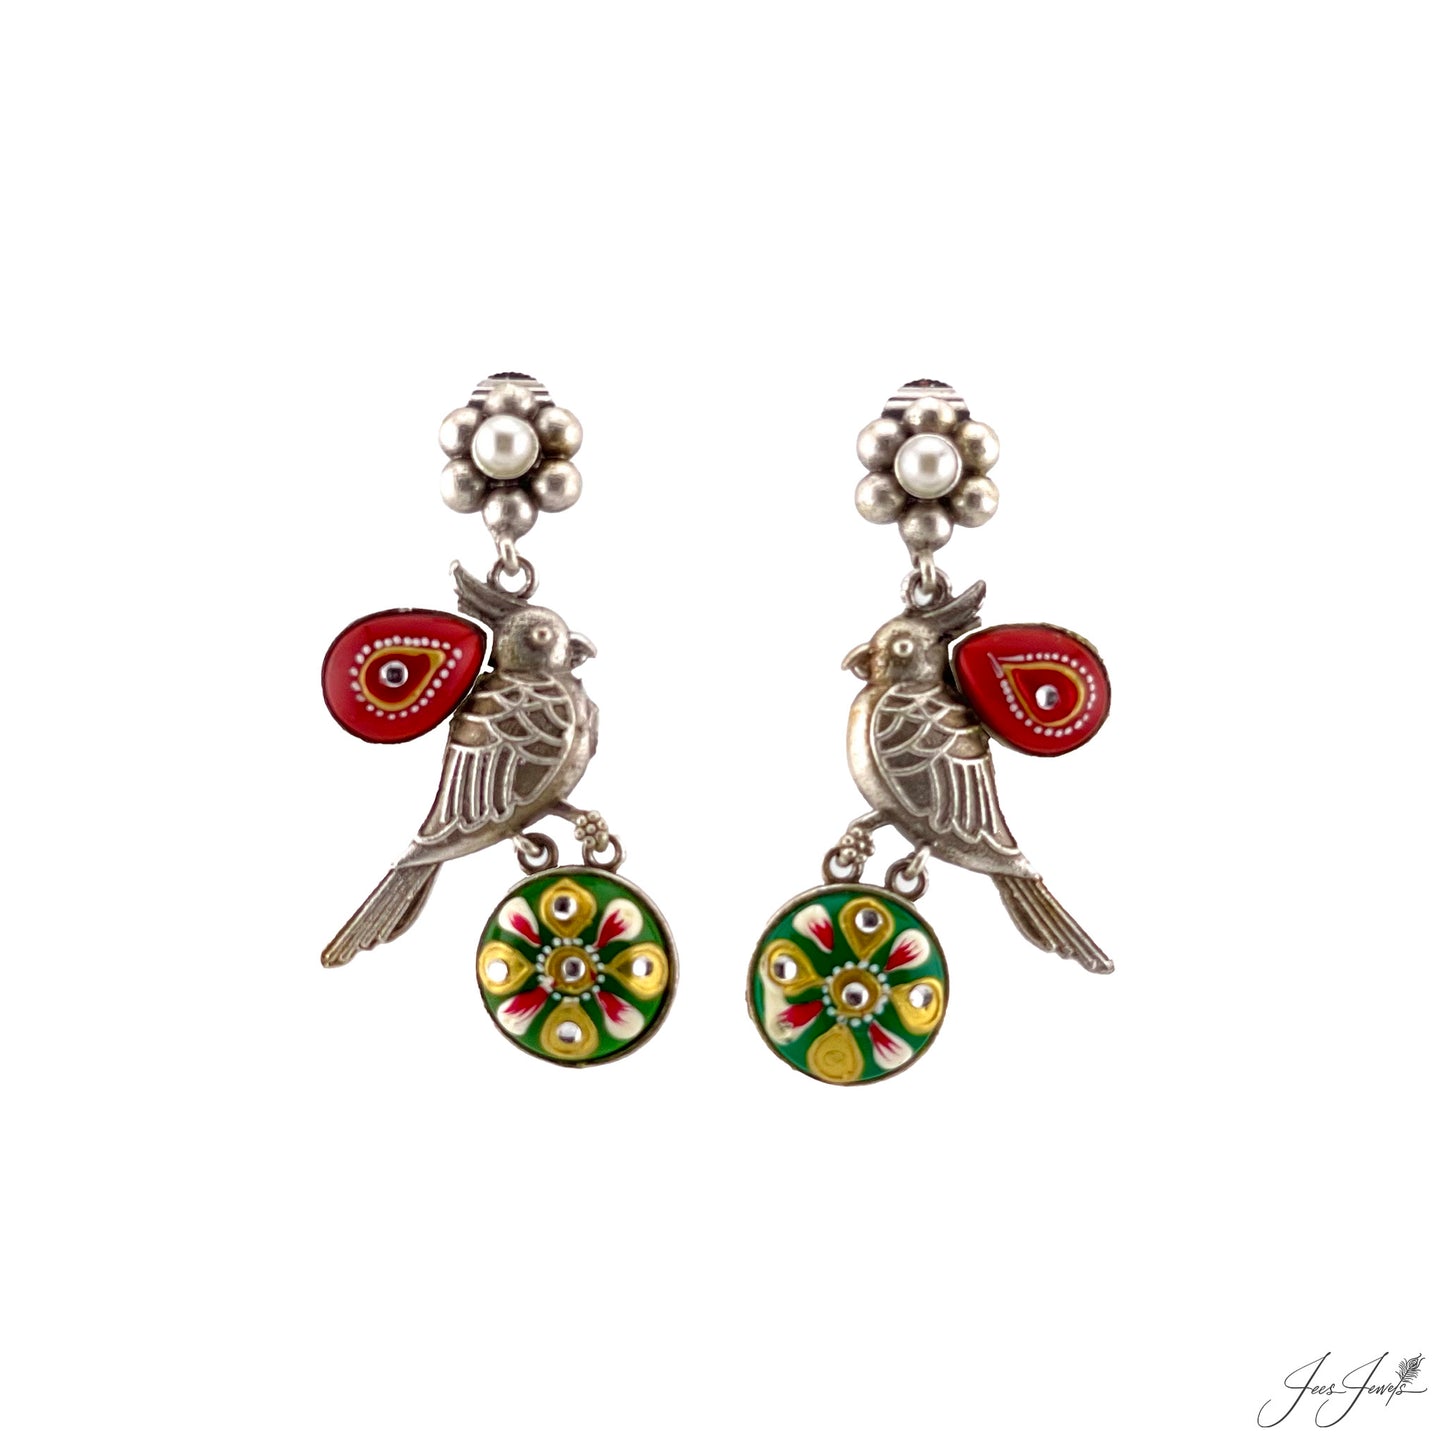 Hand-painted Bird Shape Earrings with Red and Green Monalisa Stone